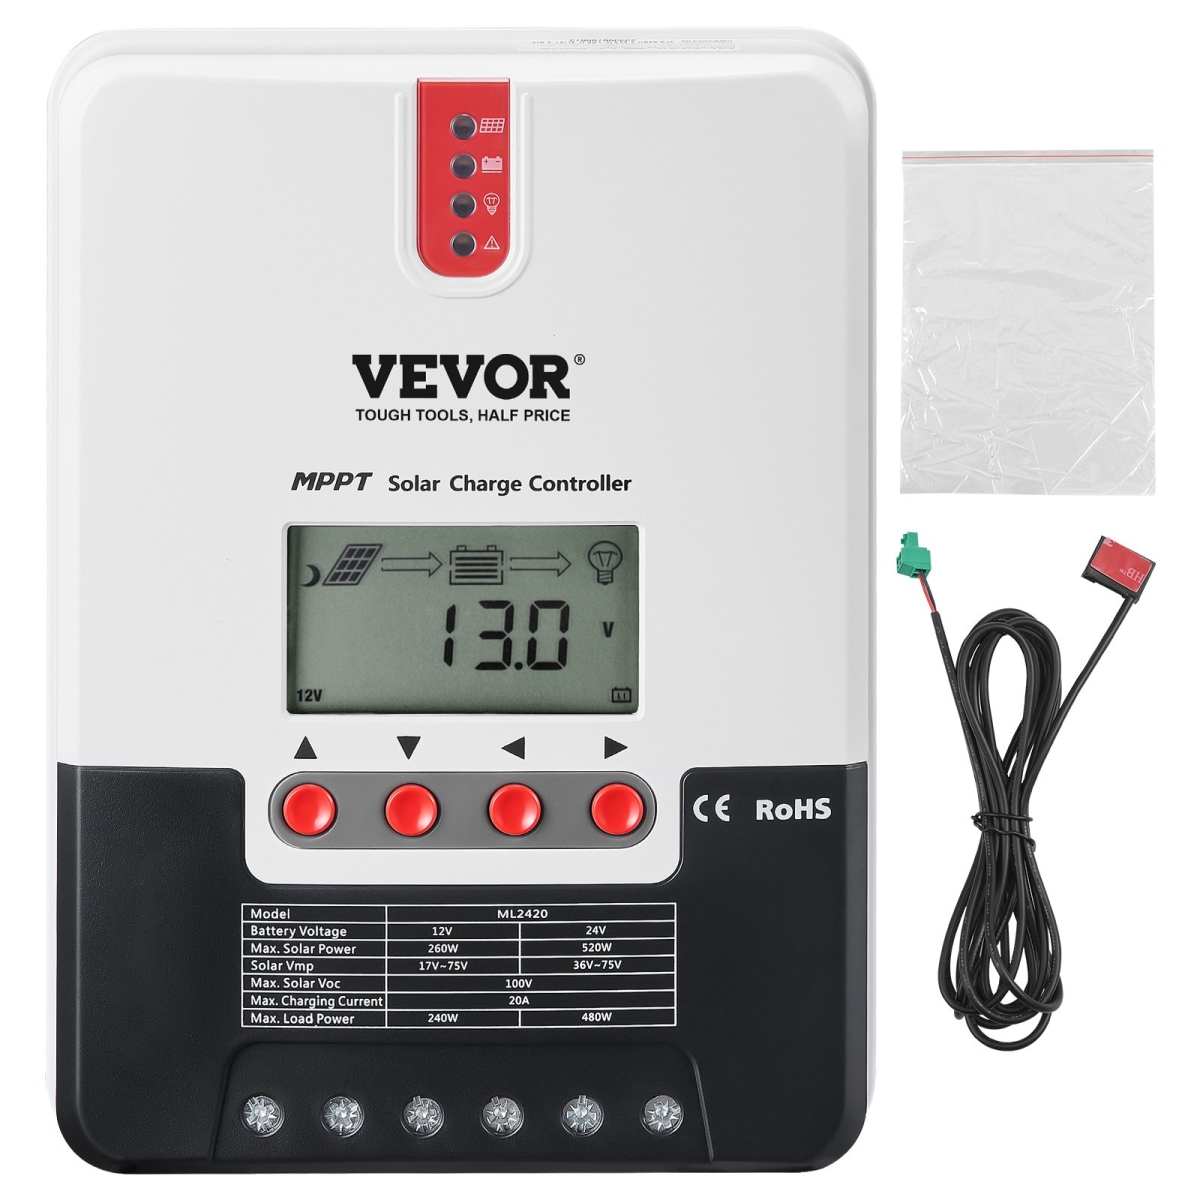 Picture of Vevor DYTYNCDKZQWYXOHN8V9 20A MPPT Solar Charge Controller